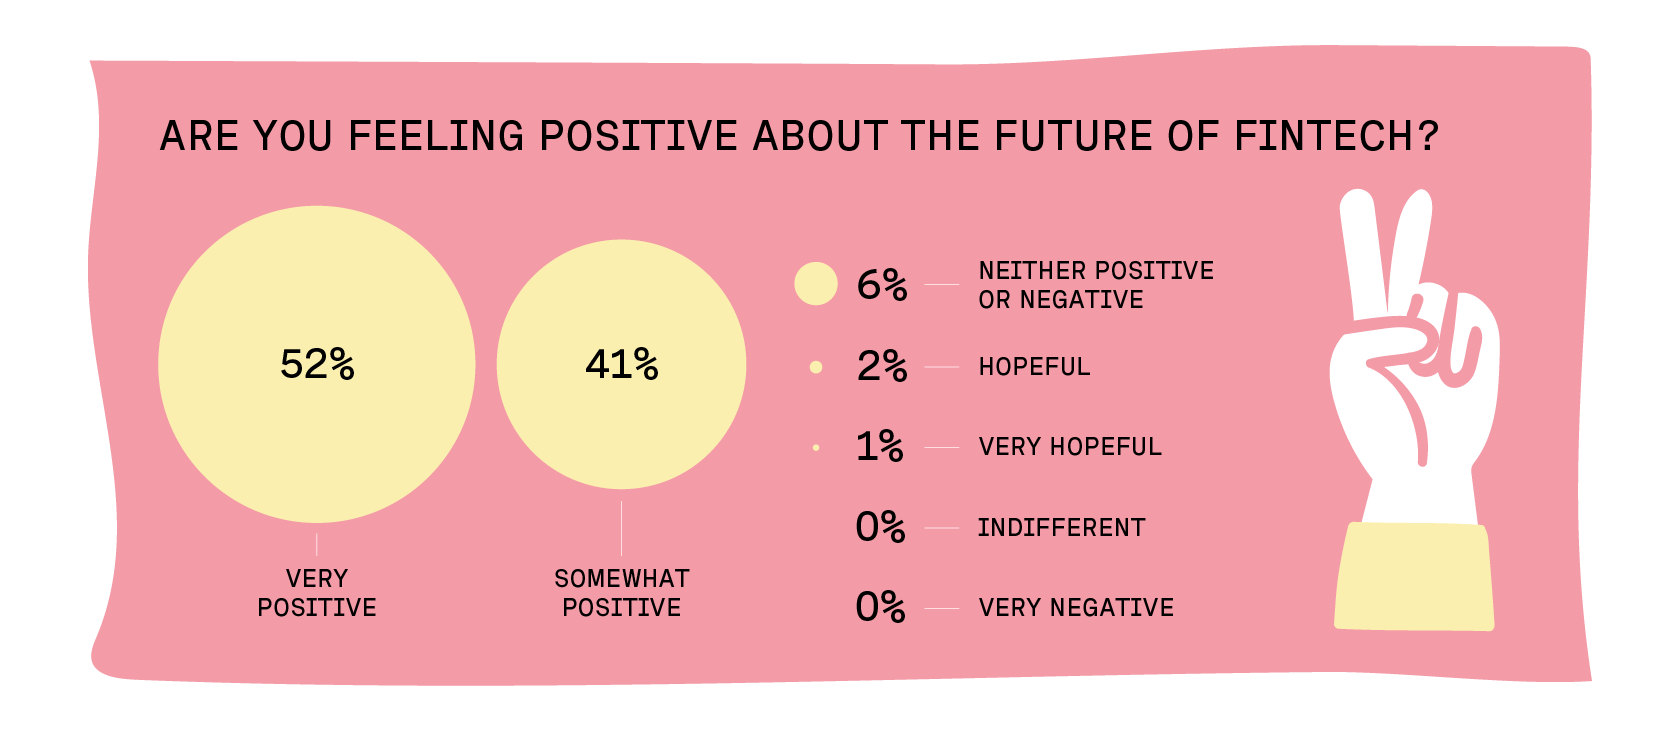 Graph showing if people are feeling positive about the future of fintech